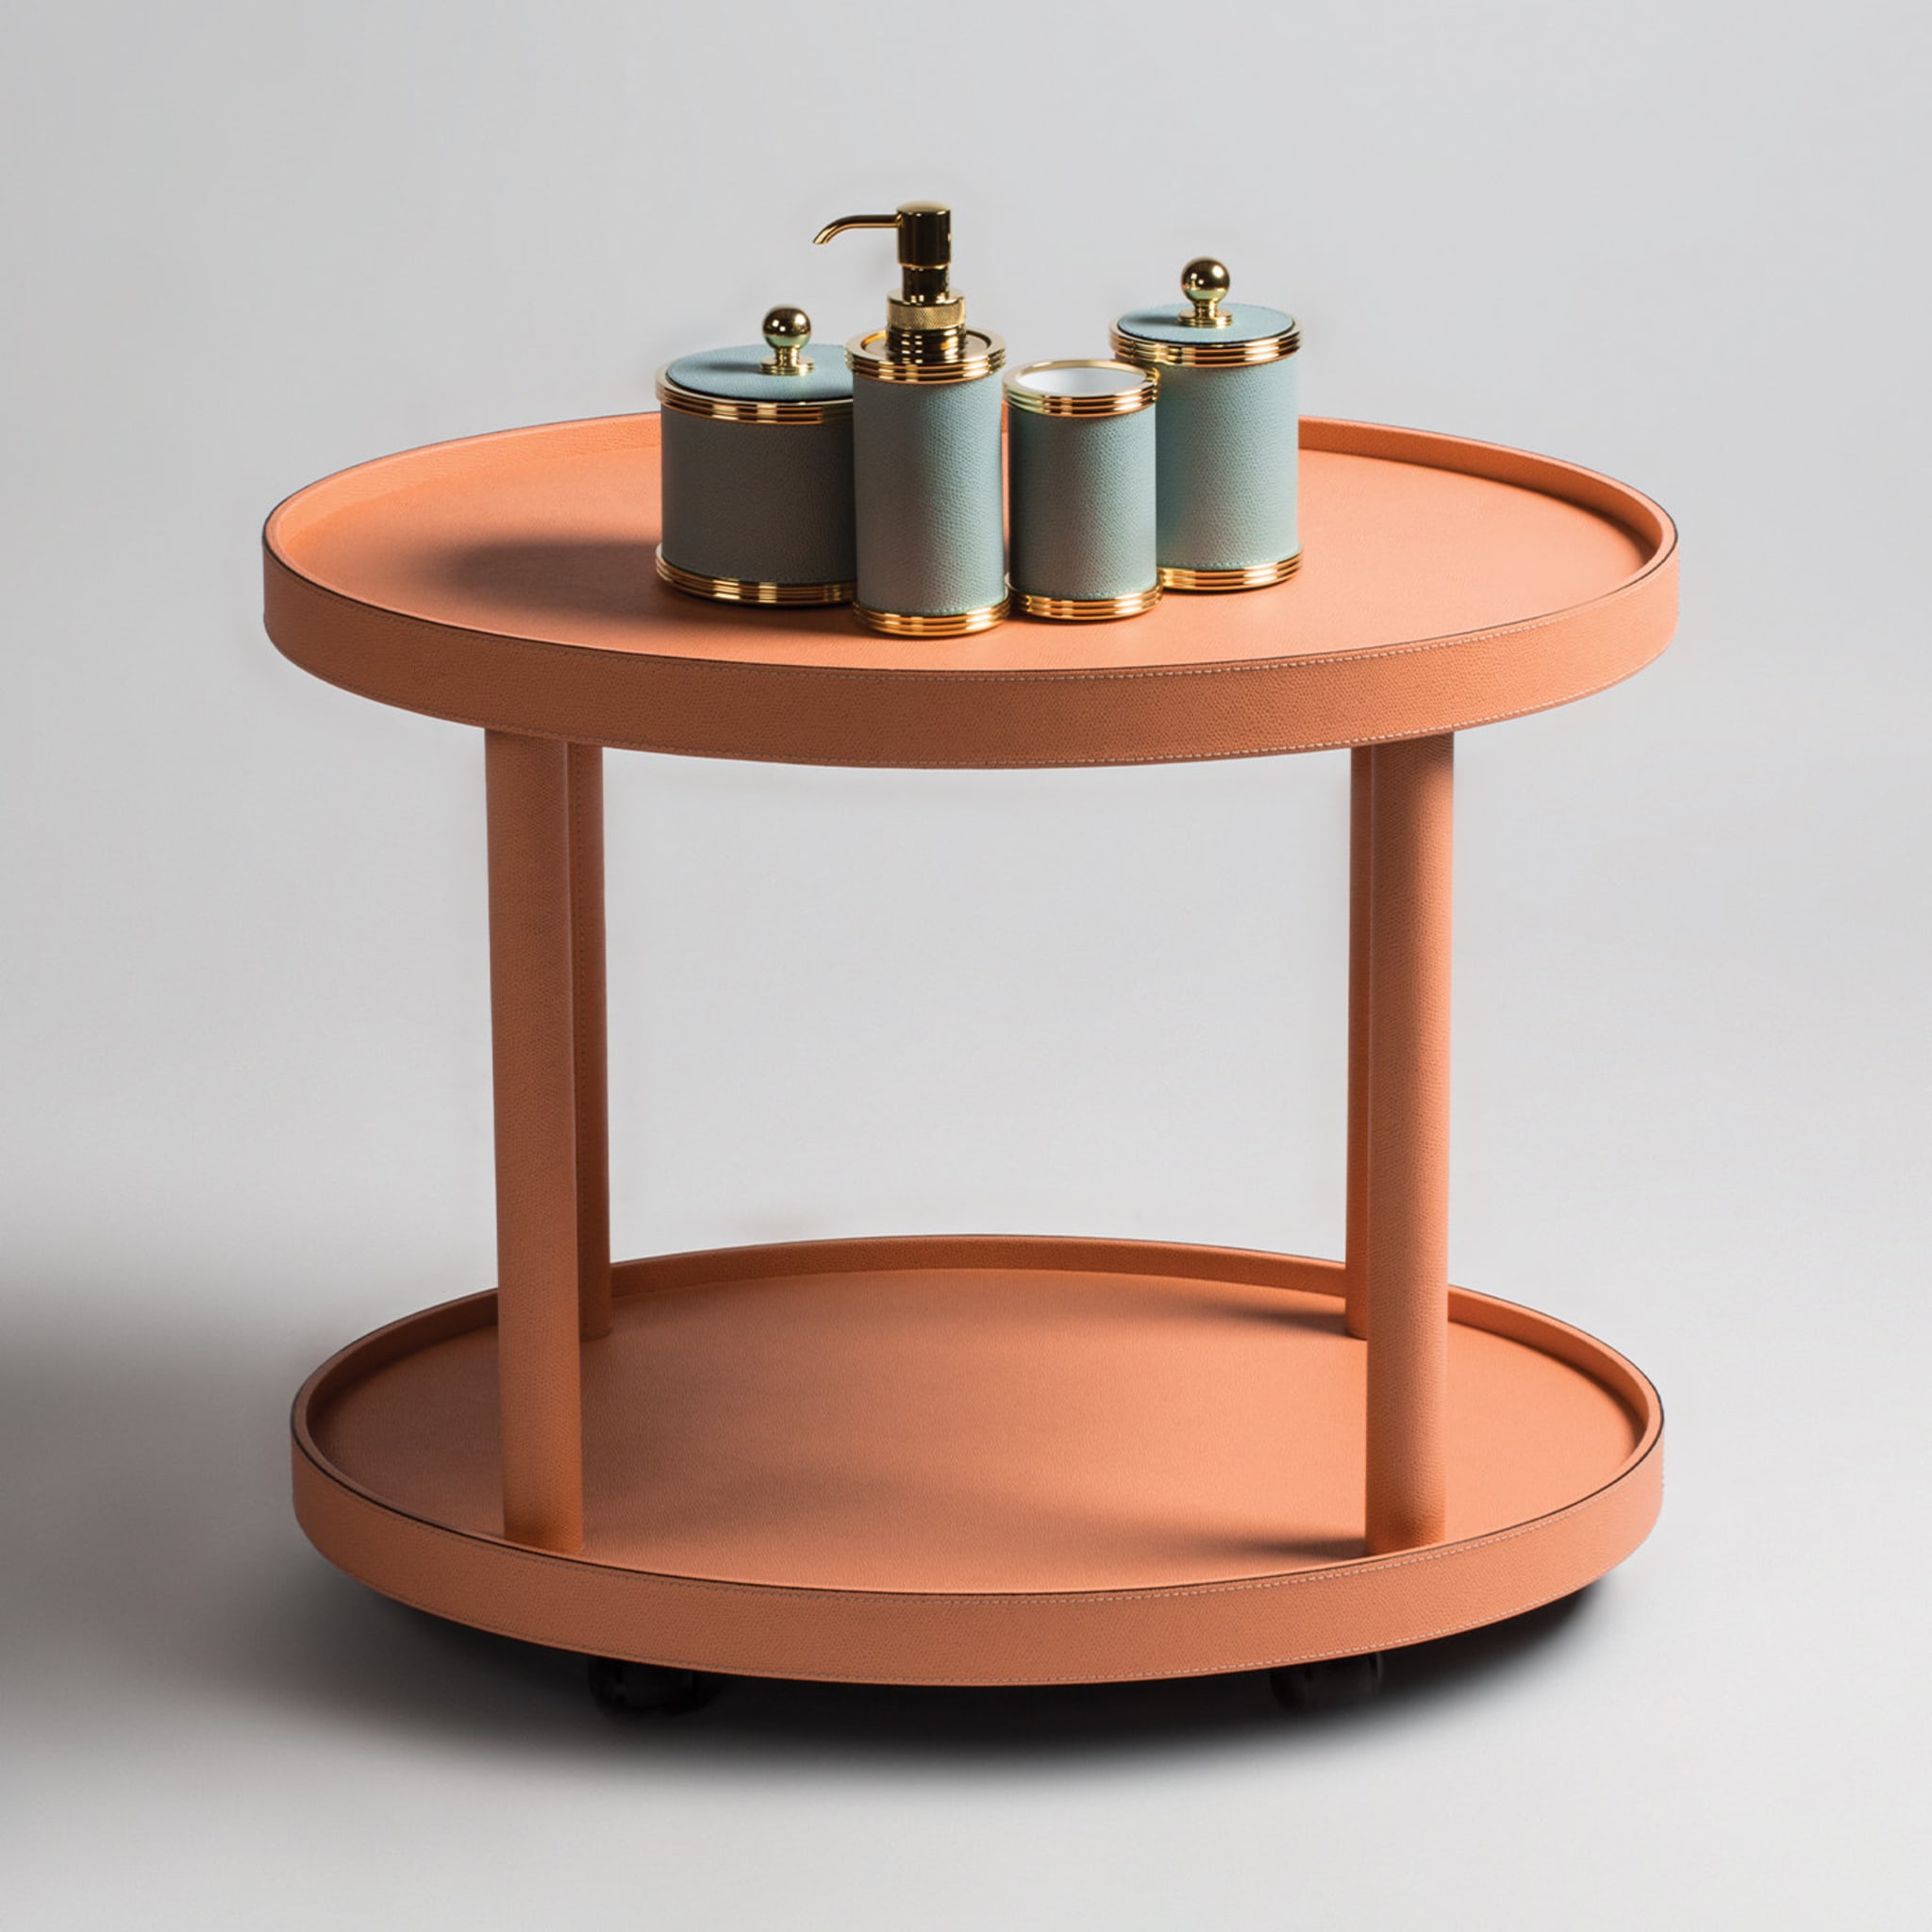 Polo Trolley 2-Tier Salmon Oval Table  - Alternative view 1